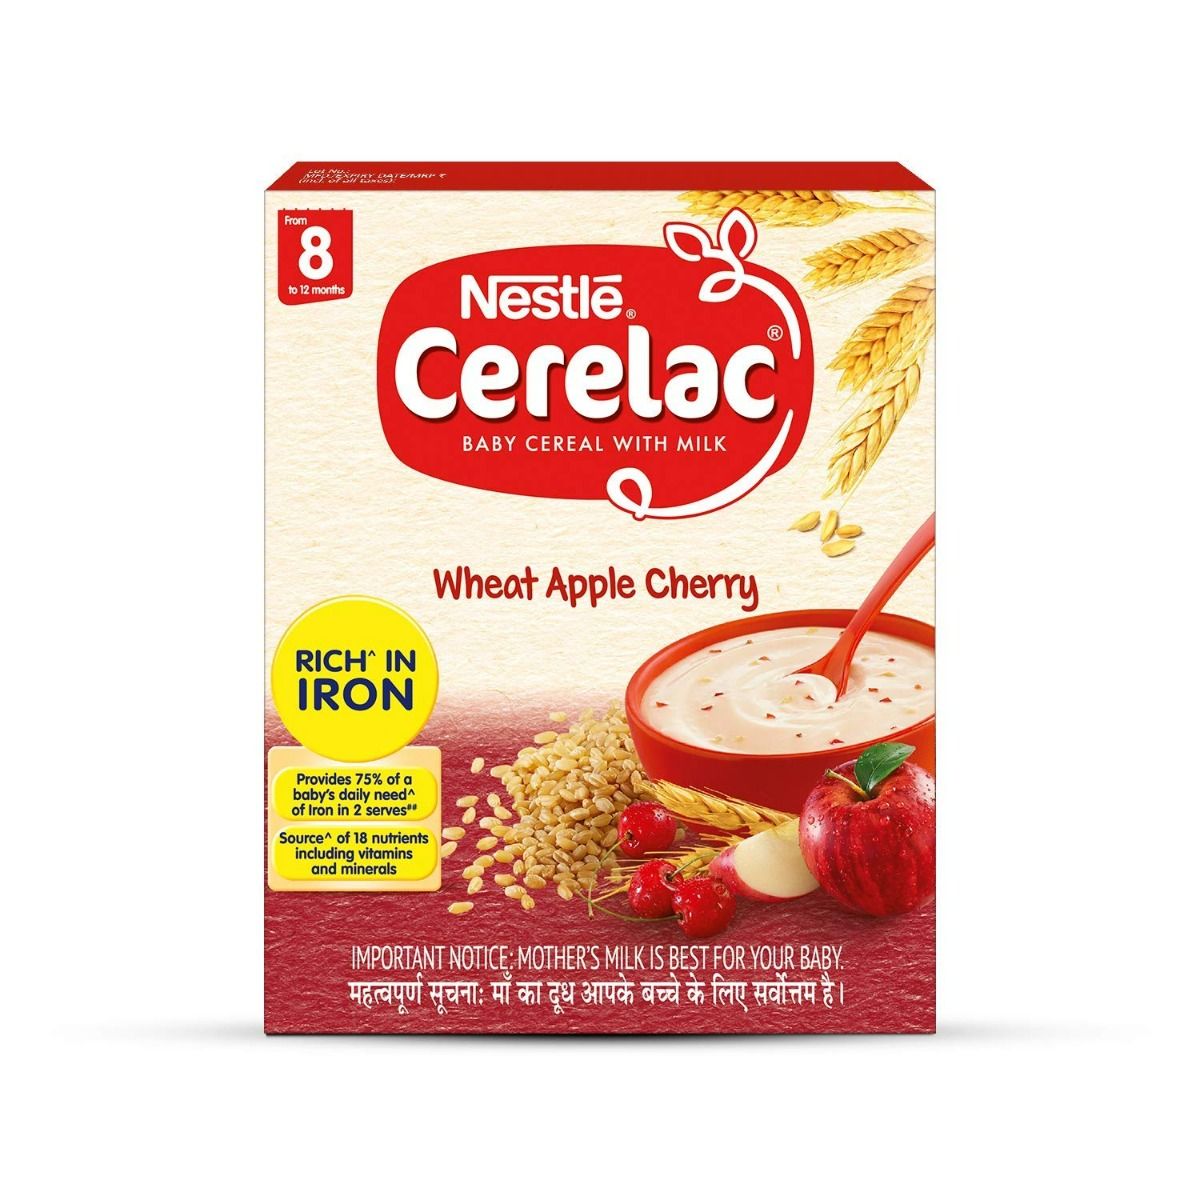 Nestle Cerelac Wheat Apple Cherry Baby Cereal, 8 to 12 Months, 300 gm Refill Pack, Pack of 1 